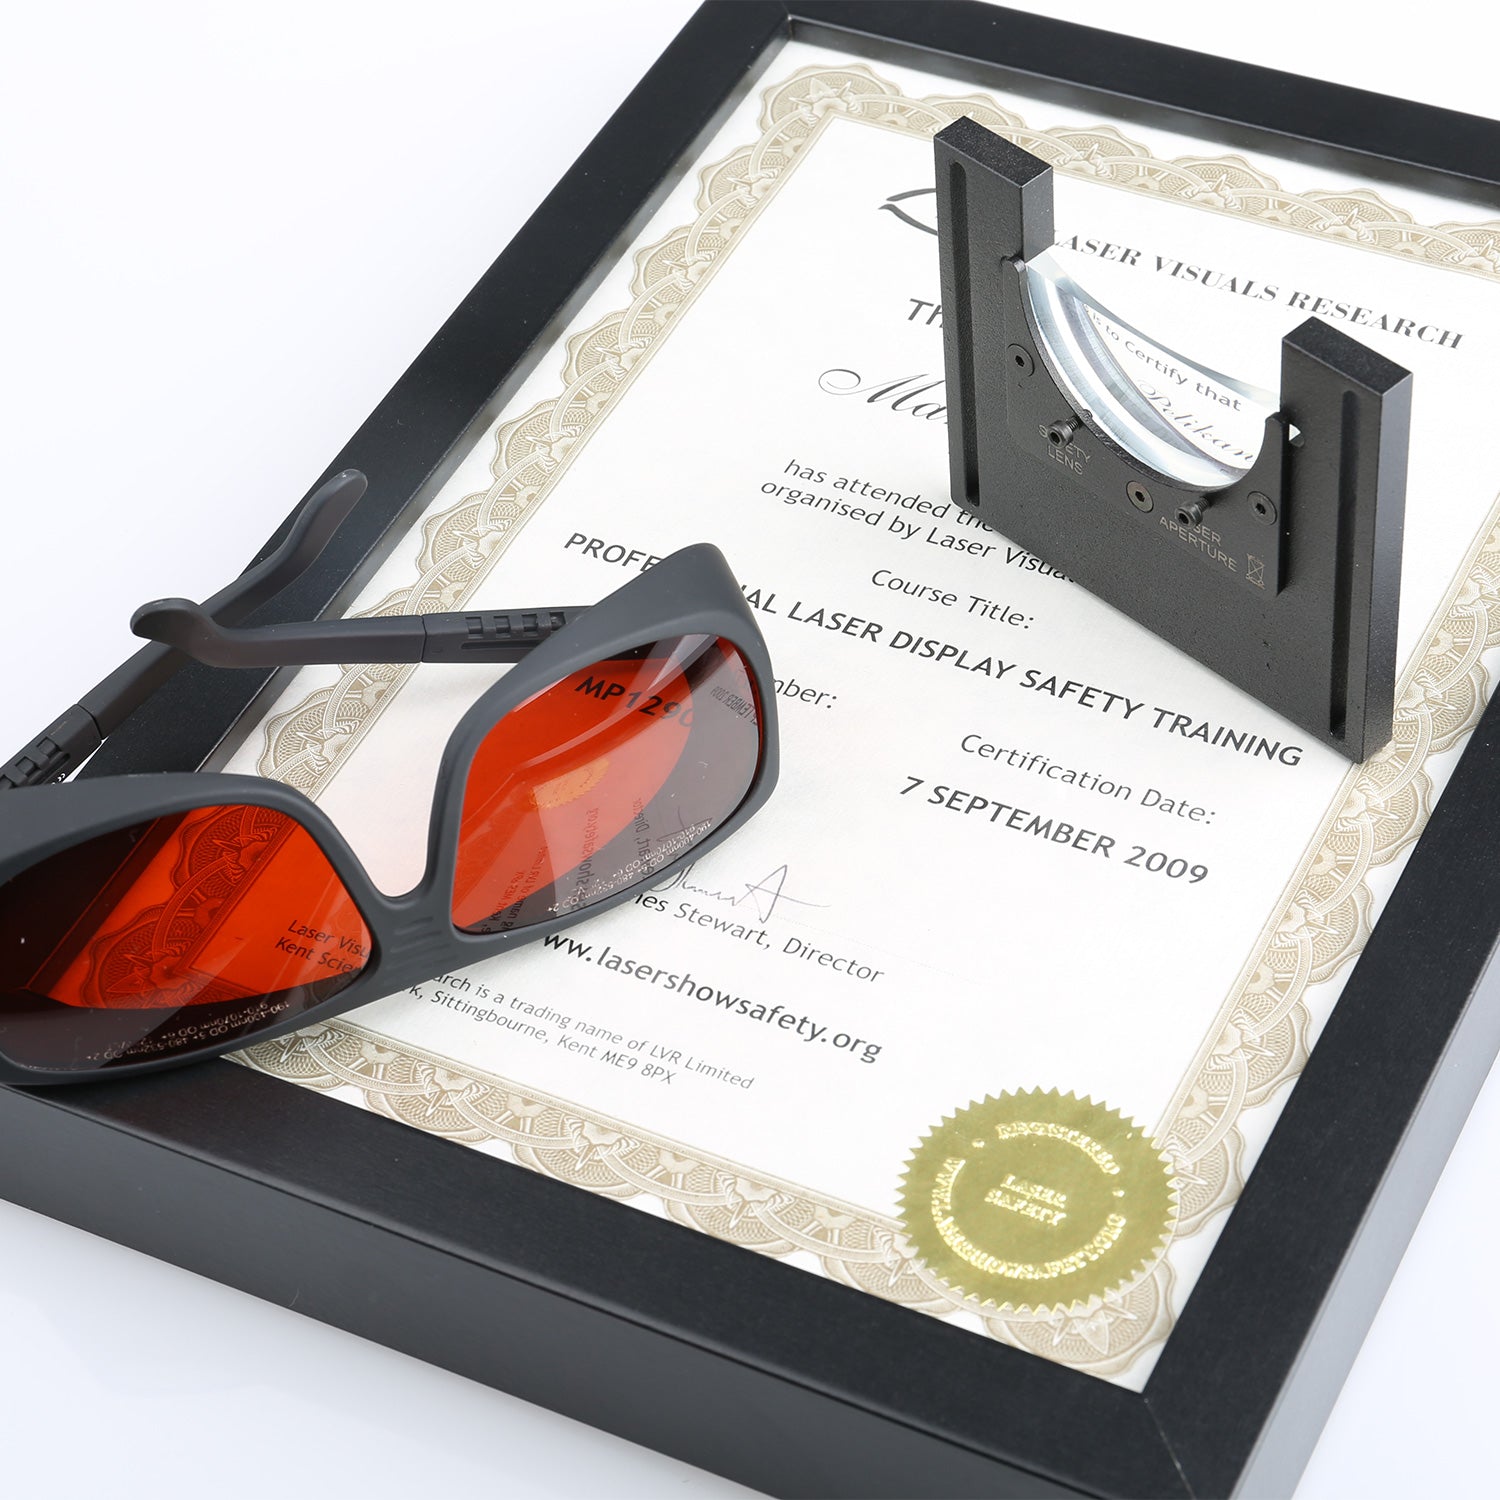 Laser Safety training certificate